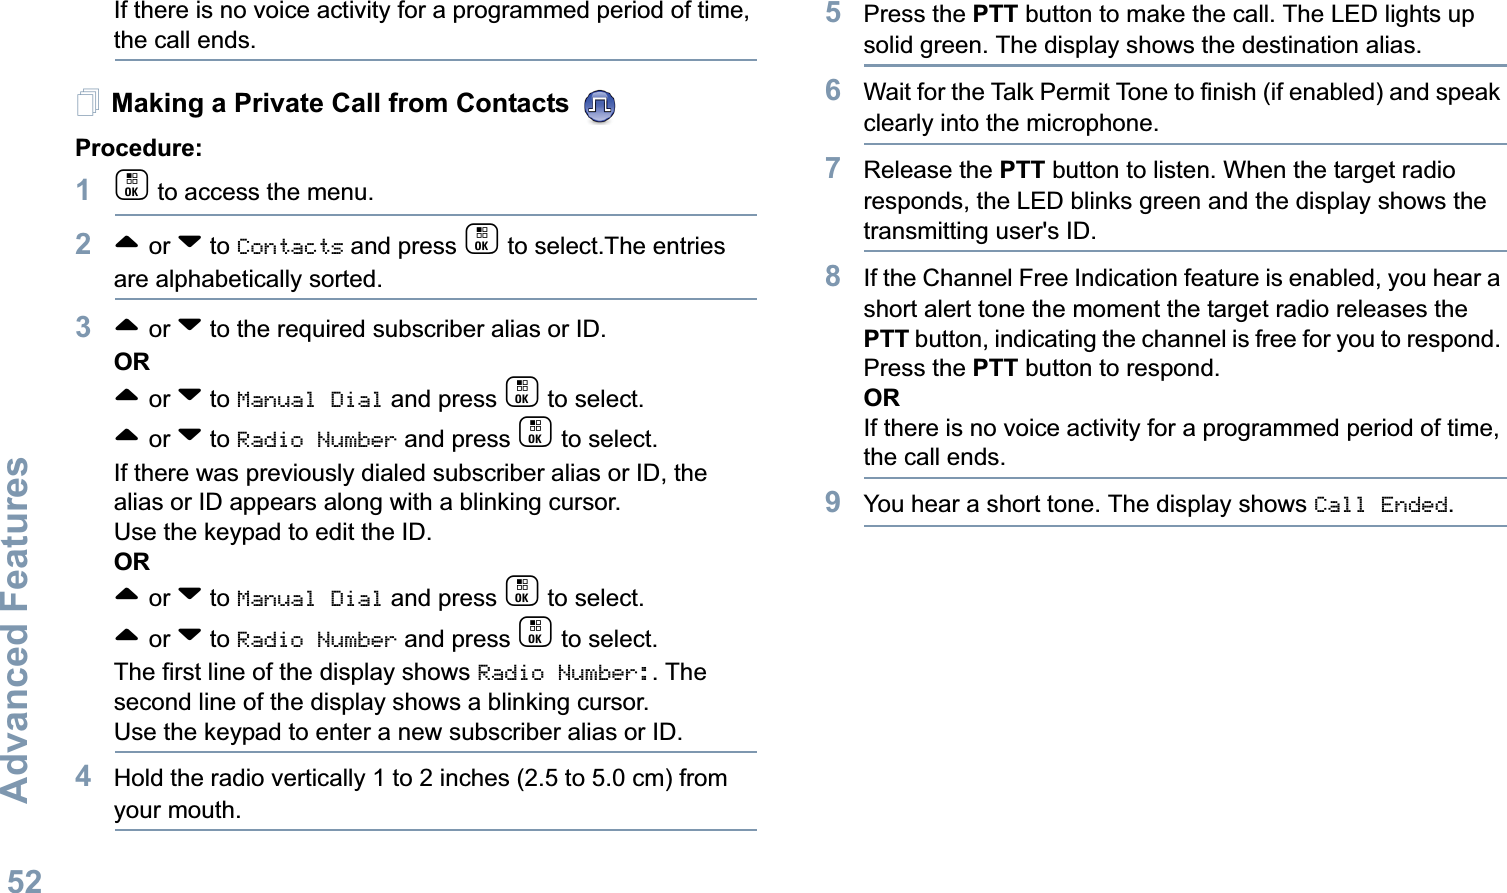 Advanced FeaturesEnglish52If there is no voice activity for a programmed period of time, the call ends.Making a Private Call from Contacts Procedure:1c to access the menu.2^ or v to Contacts and press c to select.The entries are alphabetically sorted.3^ or v to the required subscriber alias or ID.OR^ or v to Manual Dial and press c to select.^ or v to Radio Number and press c to select.If there was previously dialed subscriber alias or ID, the alias or ID appears along with a blinking cursor. Use the keypad to edit the ID.OR^ or v to Manual Dial and press c to select. ^ or v to Radio Number and press c to select.The first line of the display shows Radio Number:. The second line of the display shows a blinking cursor. Use the keypad to enter a new subscriber alias or ID.4Hold the radio vertically 1 to 2 inches (2.5 to 5.0 cm) from your mouth.5Press the PTT button to make the call. The LED lights up solid green. The display shows the destination alias.6Wait for the Talk Permit Tone to finish (if enabled) and speak clearly into the microphone.7Release the PTT button to listen. When the target radio responds, the LED blinks green and the display shows the transmitting user&apos;s ID.8If the Channel Free Indication feature is enabled, you hear a short alert tone the moment the target radio releases the PTT button, indicating the channel is free for you to respond. Press the PTT button to respond.ORIf there is no voice activity for a programmed period of time, the call ends.9You hear a short tone. The display shows Call Ended.